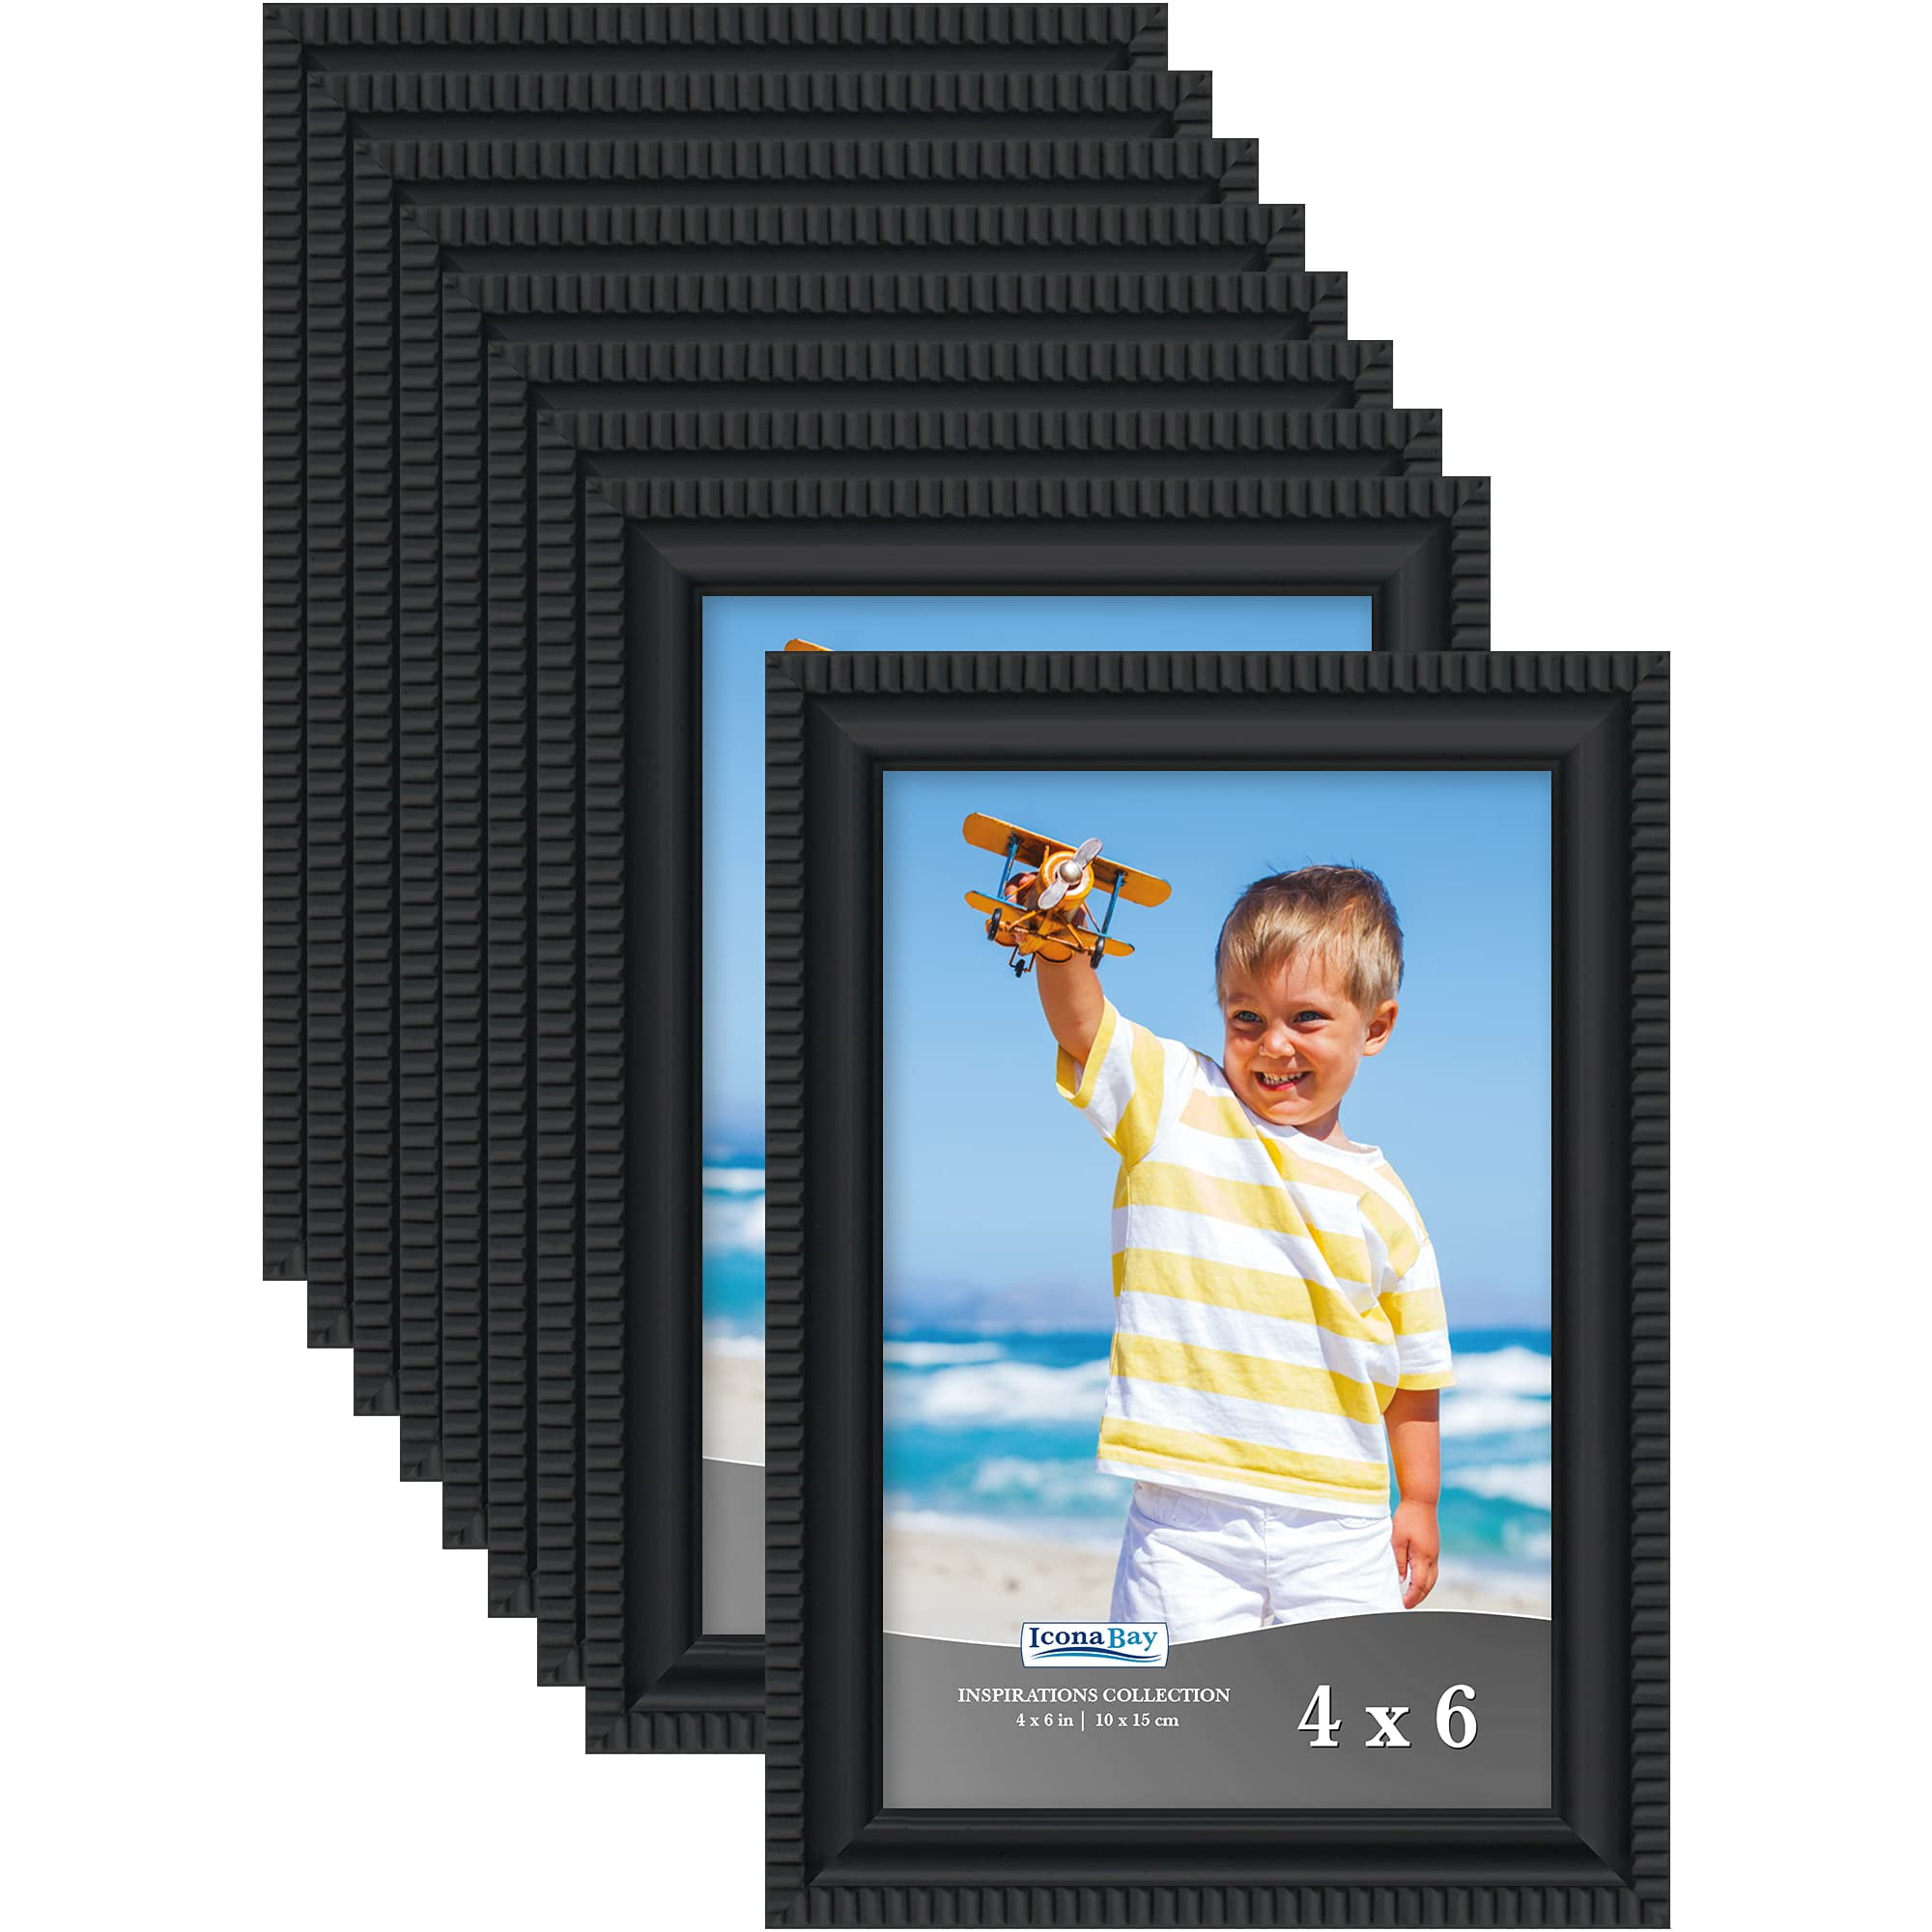 Icona Bay 4x6 Picture Frames Wall Mount or Table Top 12 Pack, White Set of 12 Inspirations Collection Picture Frame Set